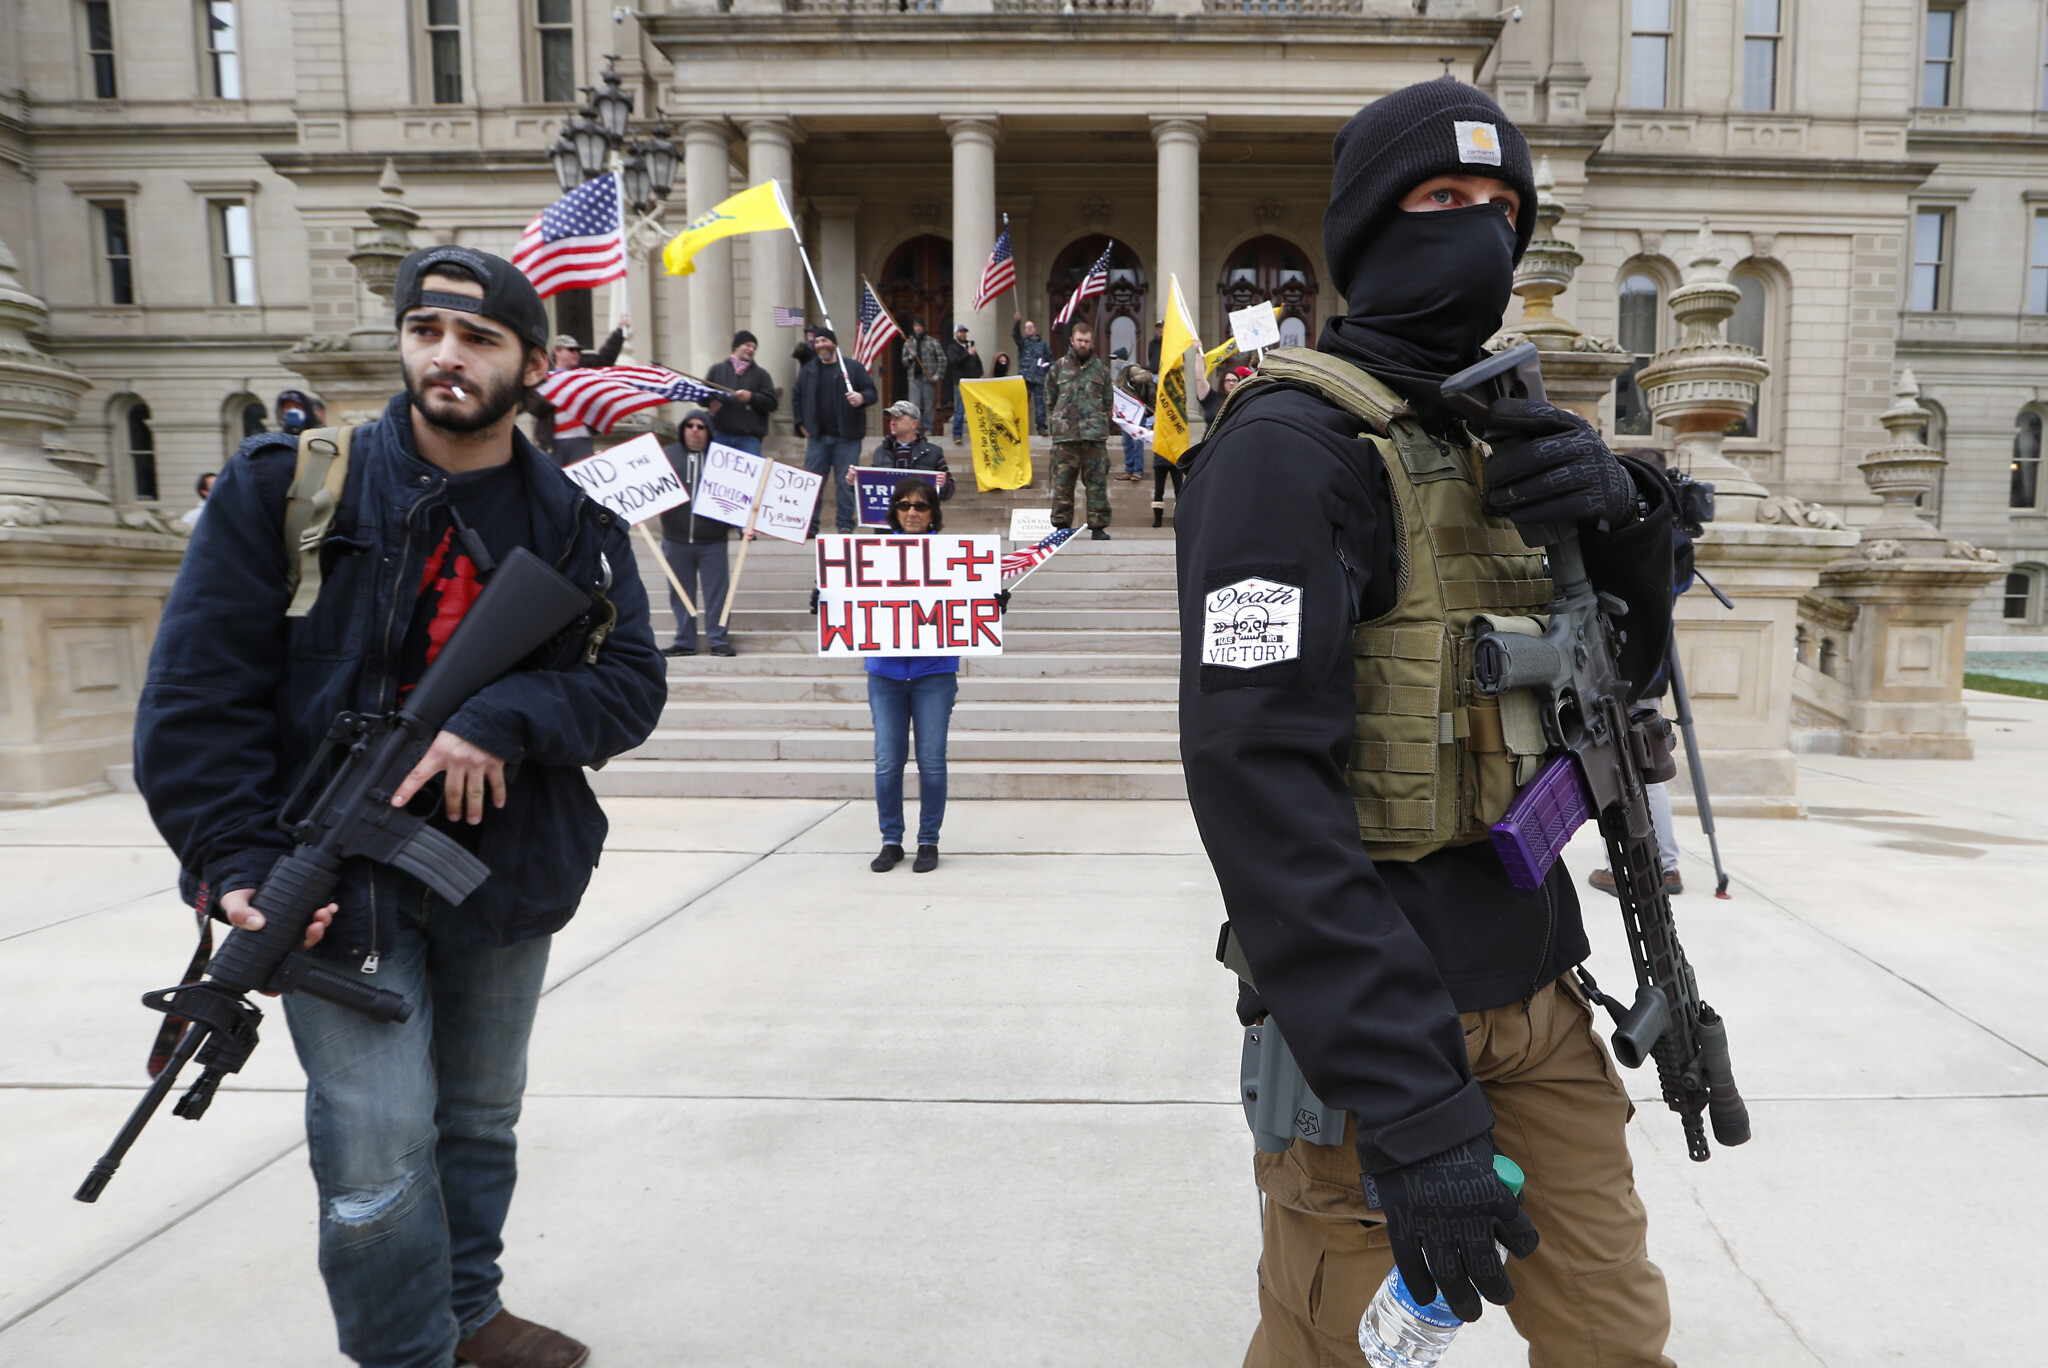 As Michigan extremists protest lockdown, state's Jews grapple with